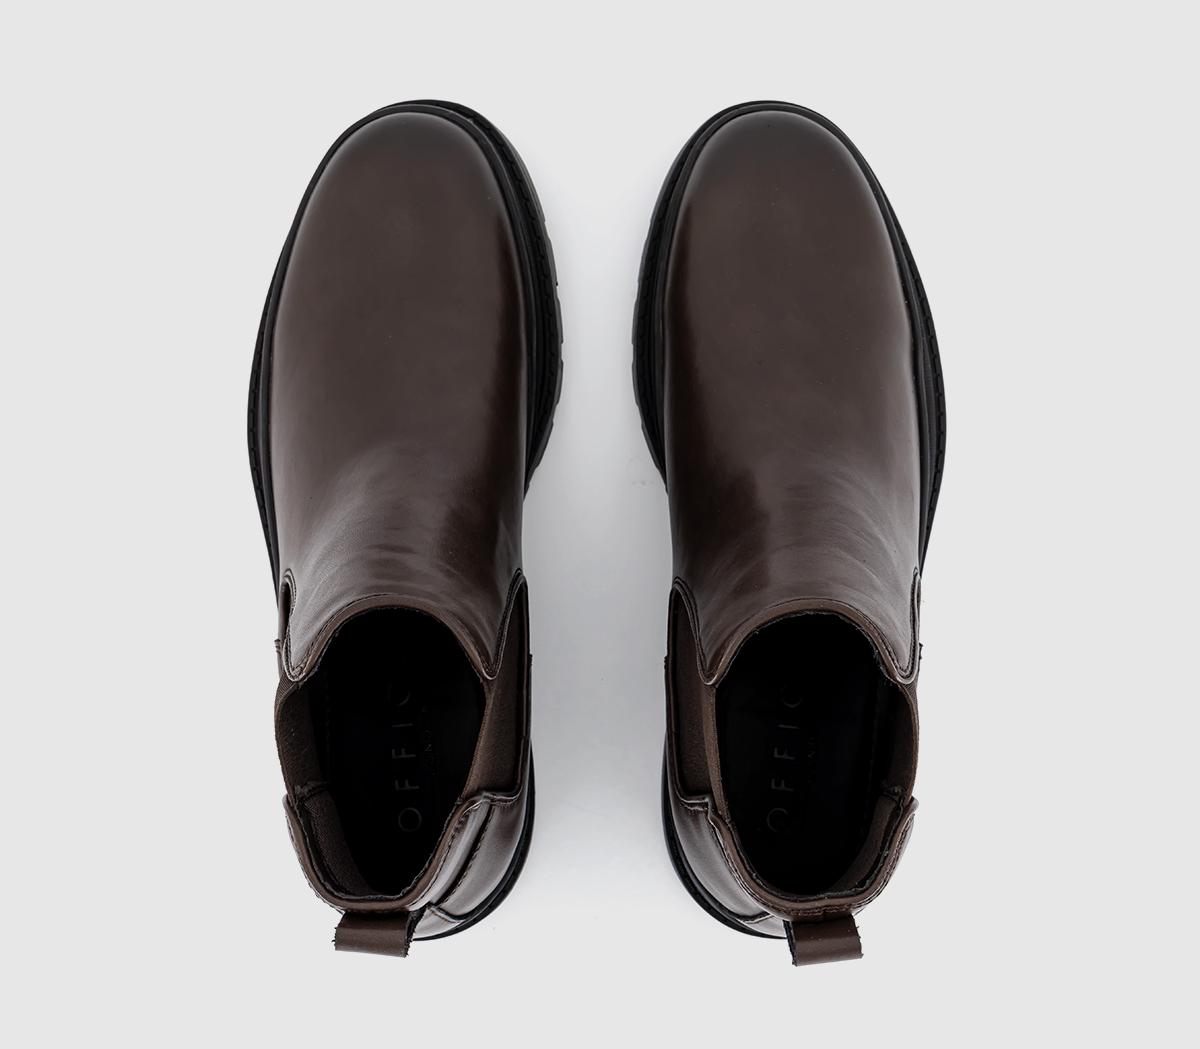 OFFICE Brampton Chunky Chelsea Boots Brown - Men's Casual Shoes